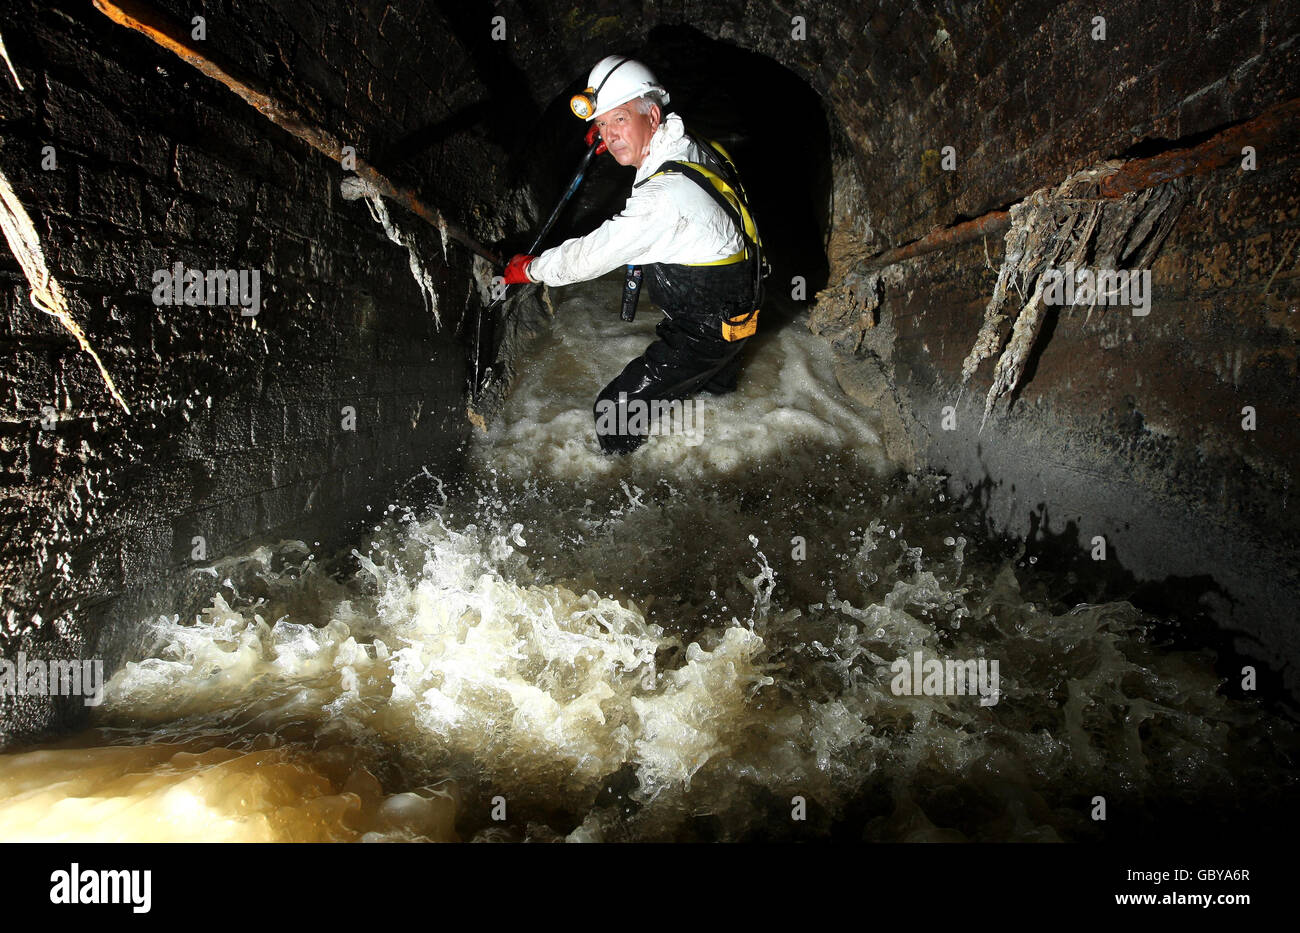 Thames Water Catchment Engineer Rob Smith works to clear a blockage of fat and sanitary products from London's sewer network as the company has launched a campaign to stop sewer abuse. Stock Photo